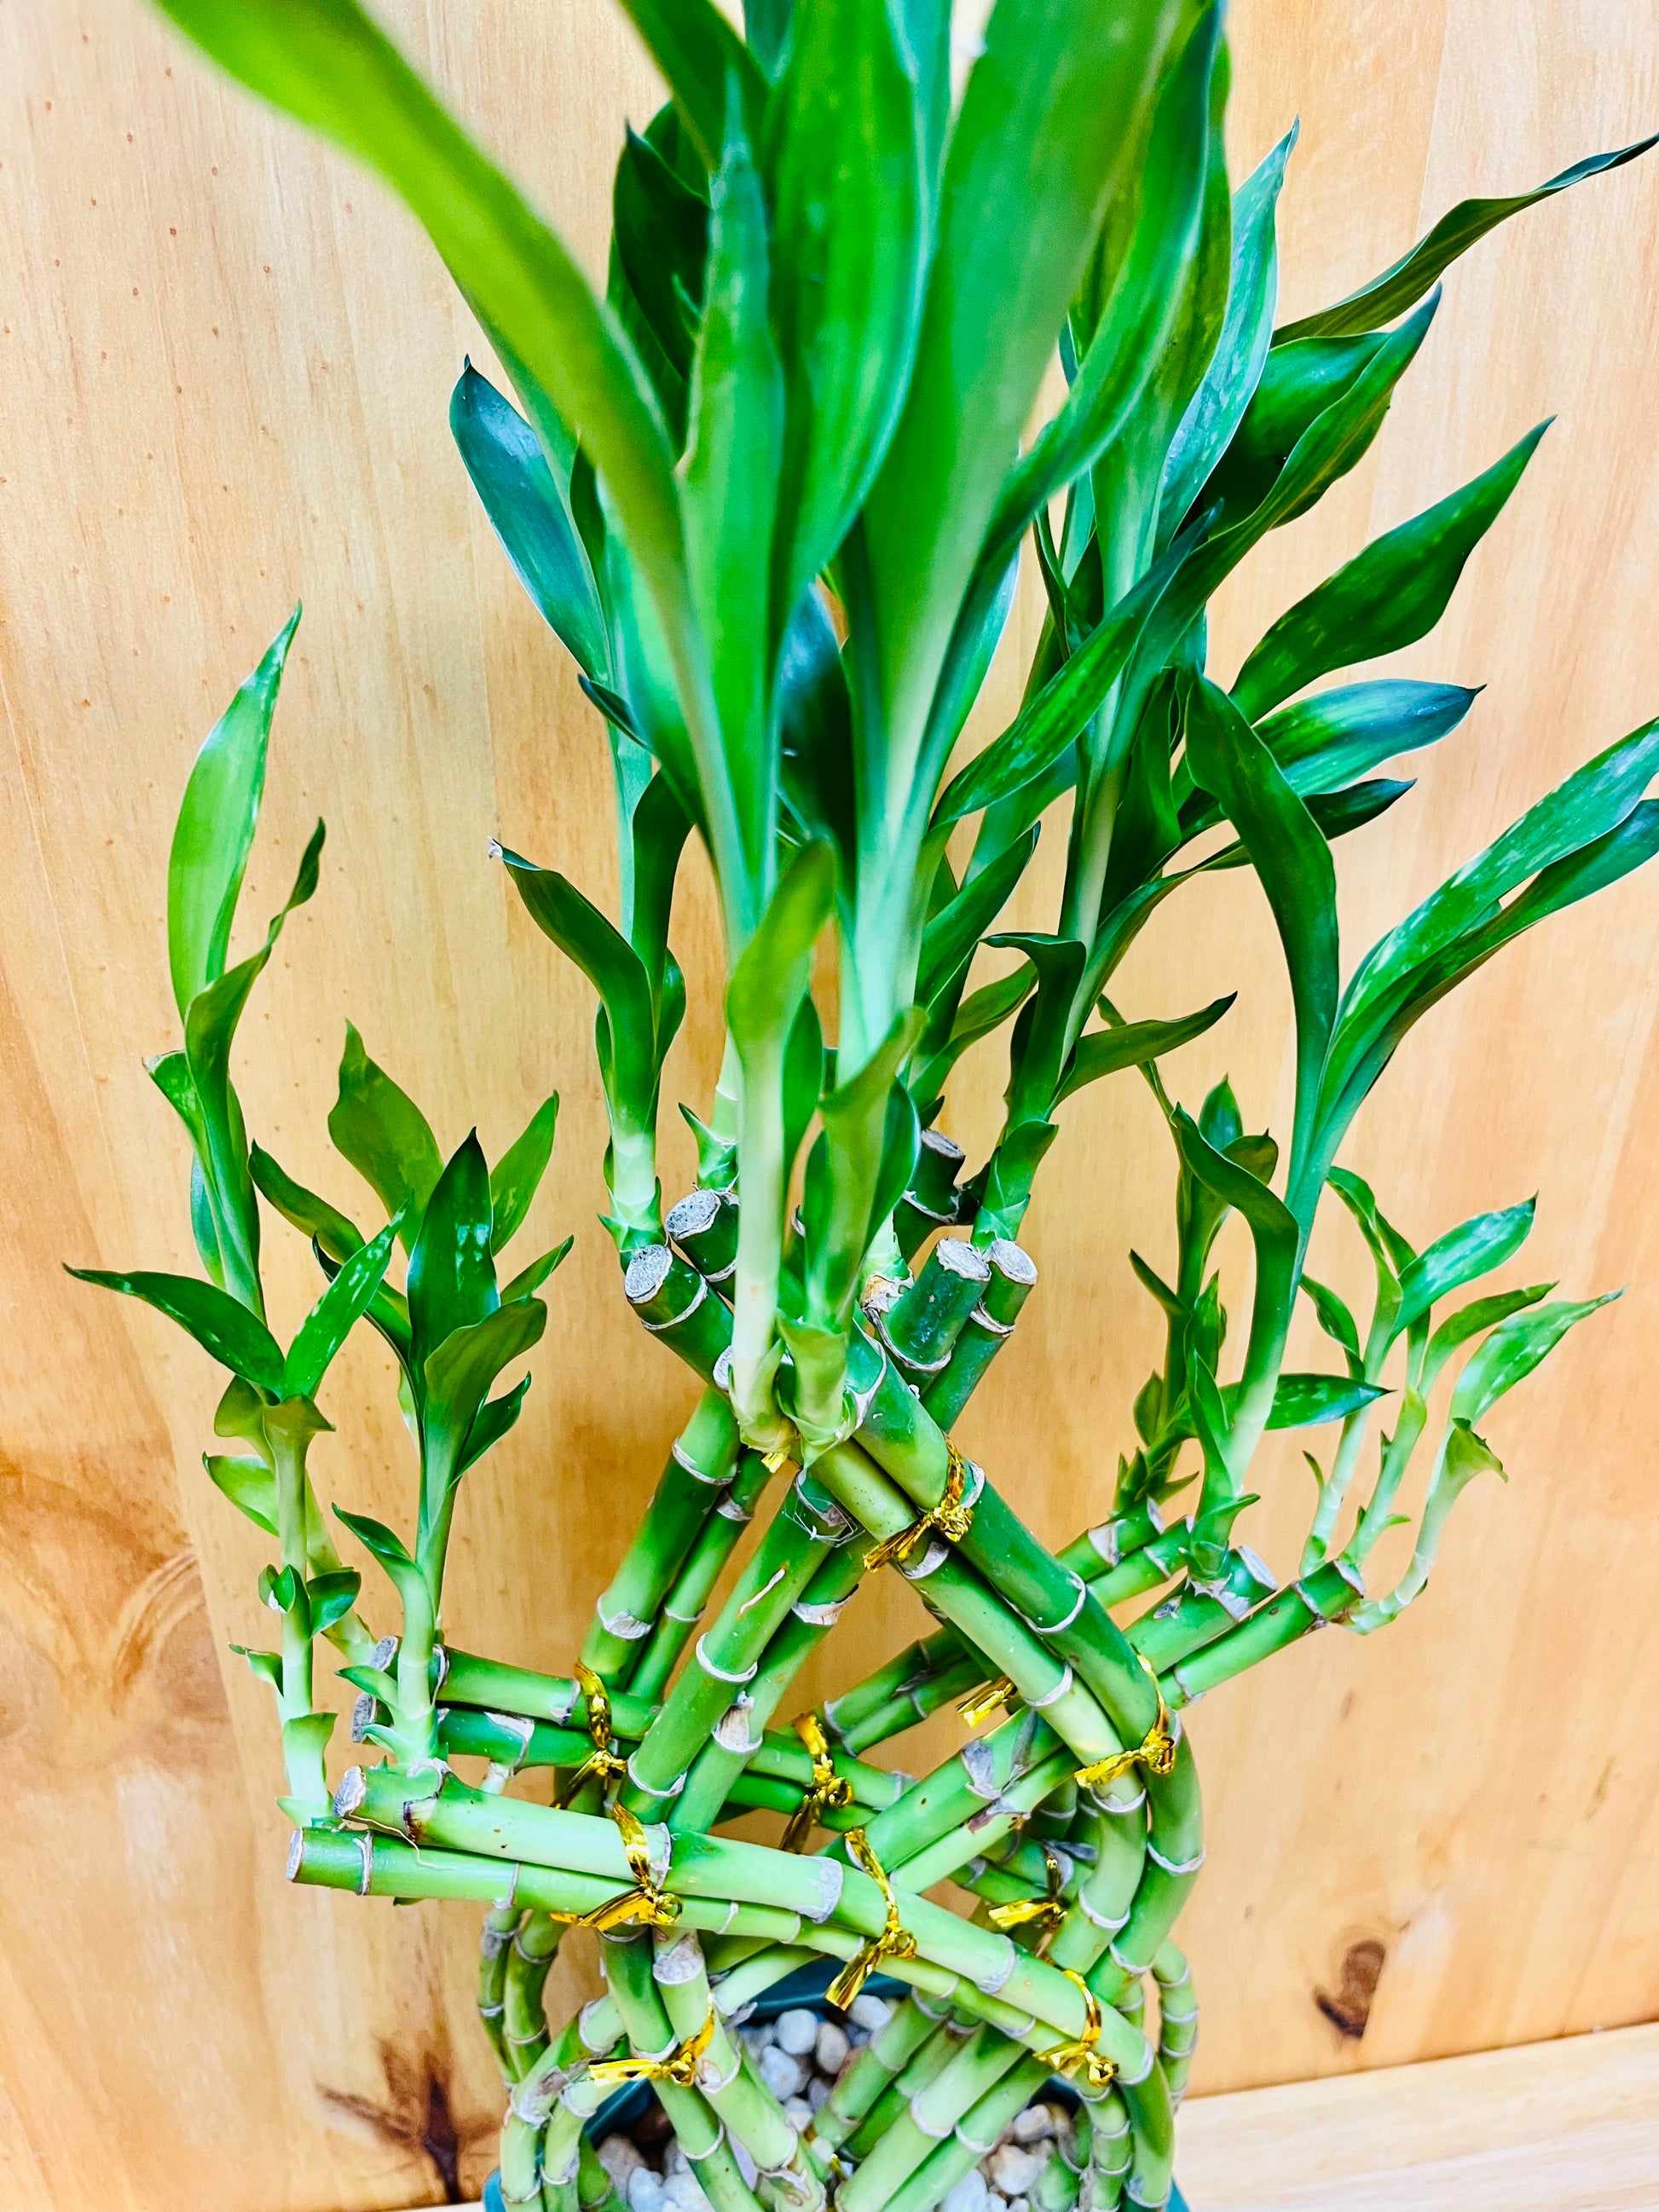 Live Braided Lucky Bamboo Easy care Houseplant